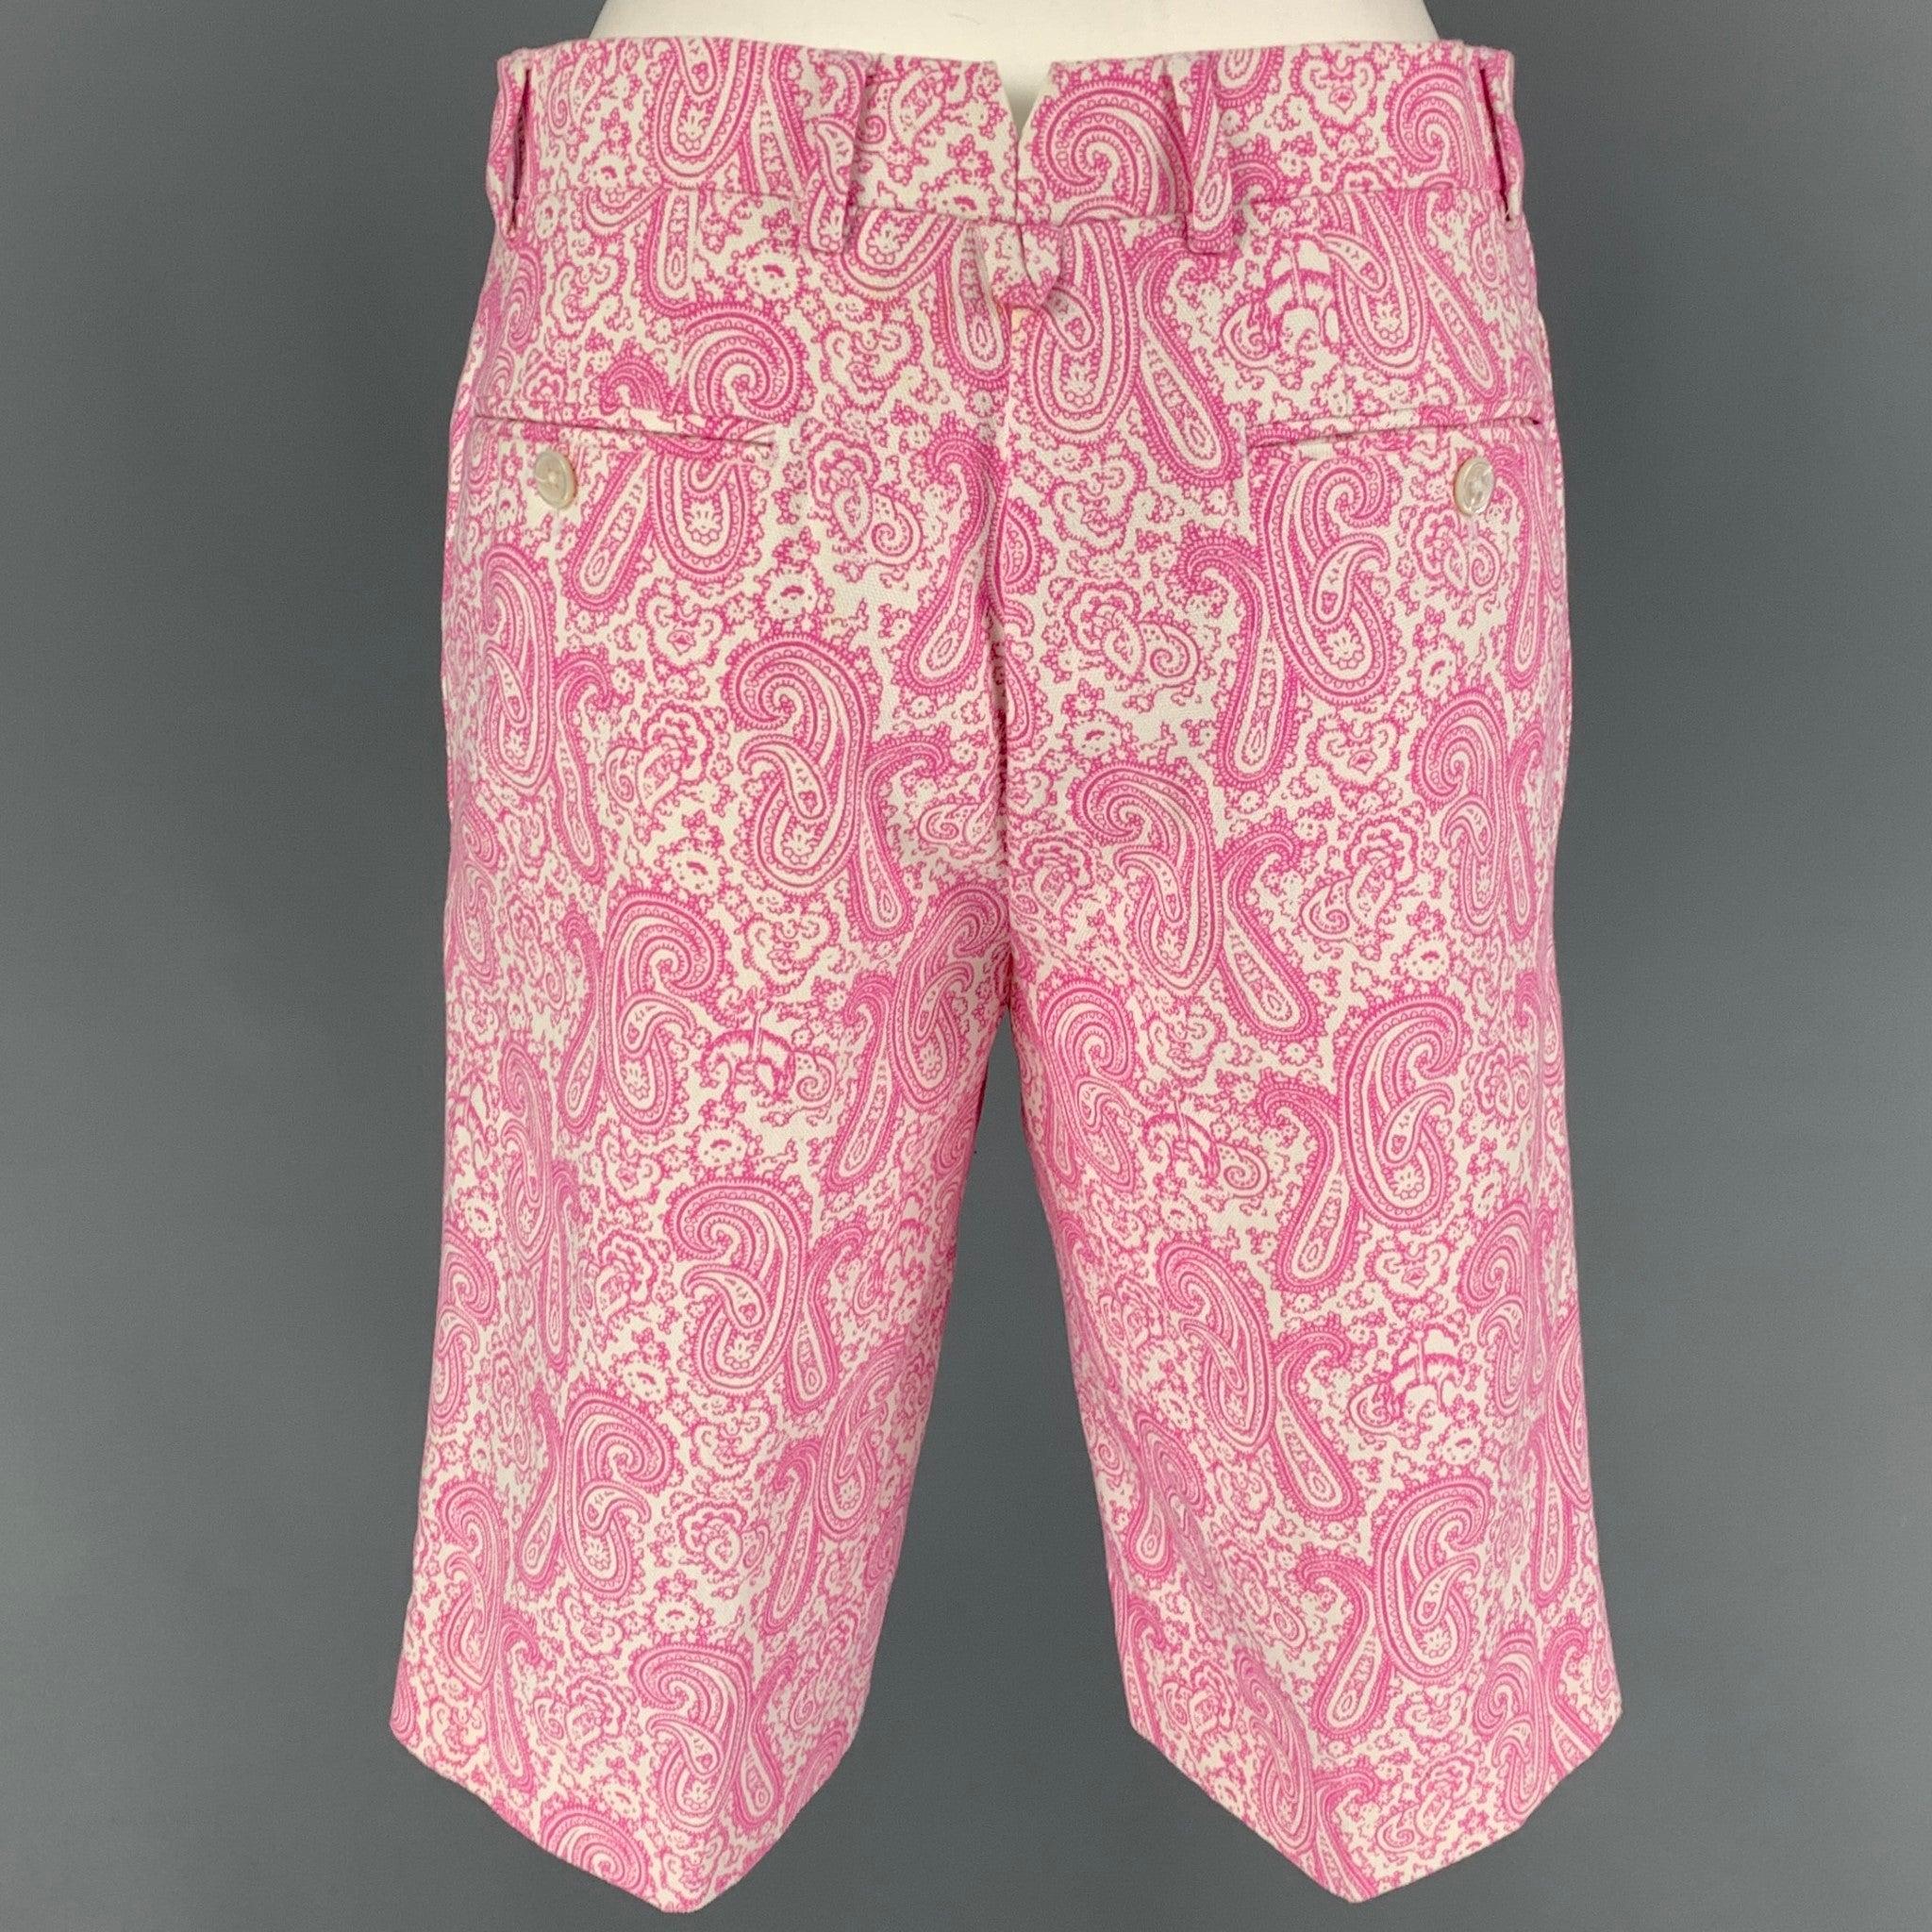 BLACK FLEECE shorts comes in a pink & white paisley cotton featuring a front tab, front mini pocket, and a button fly closure.
Very Good
Pre-Owned Condition. 

Marked:   BB0  

Measurements: 
  Waist: 28 inches  Rise: 10 inches  Inseam: 12 inches 
 